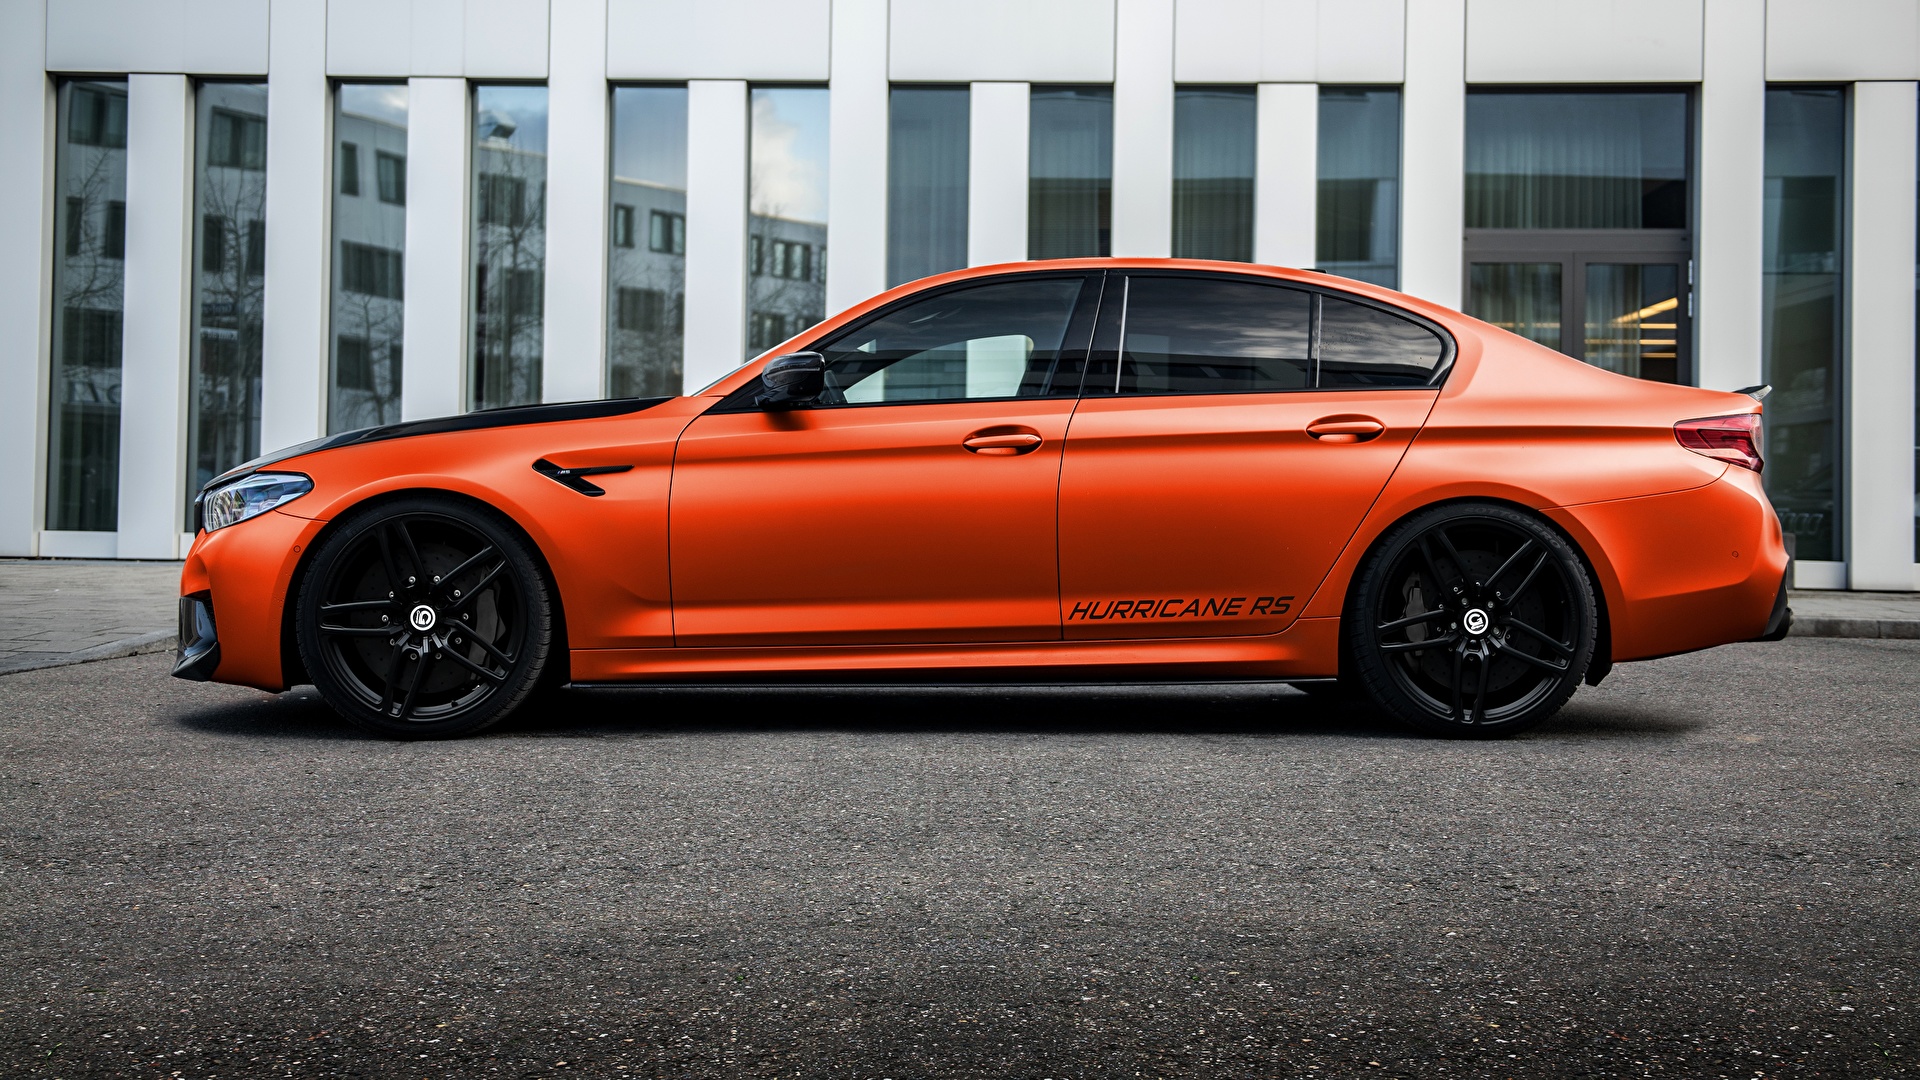 Pictures BMW Tuning M5, G-Power, F90, G5M Hurricane RS 1920x1080